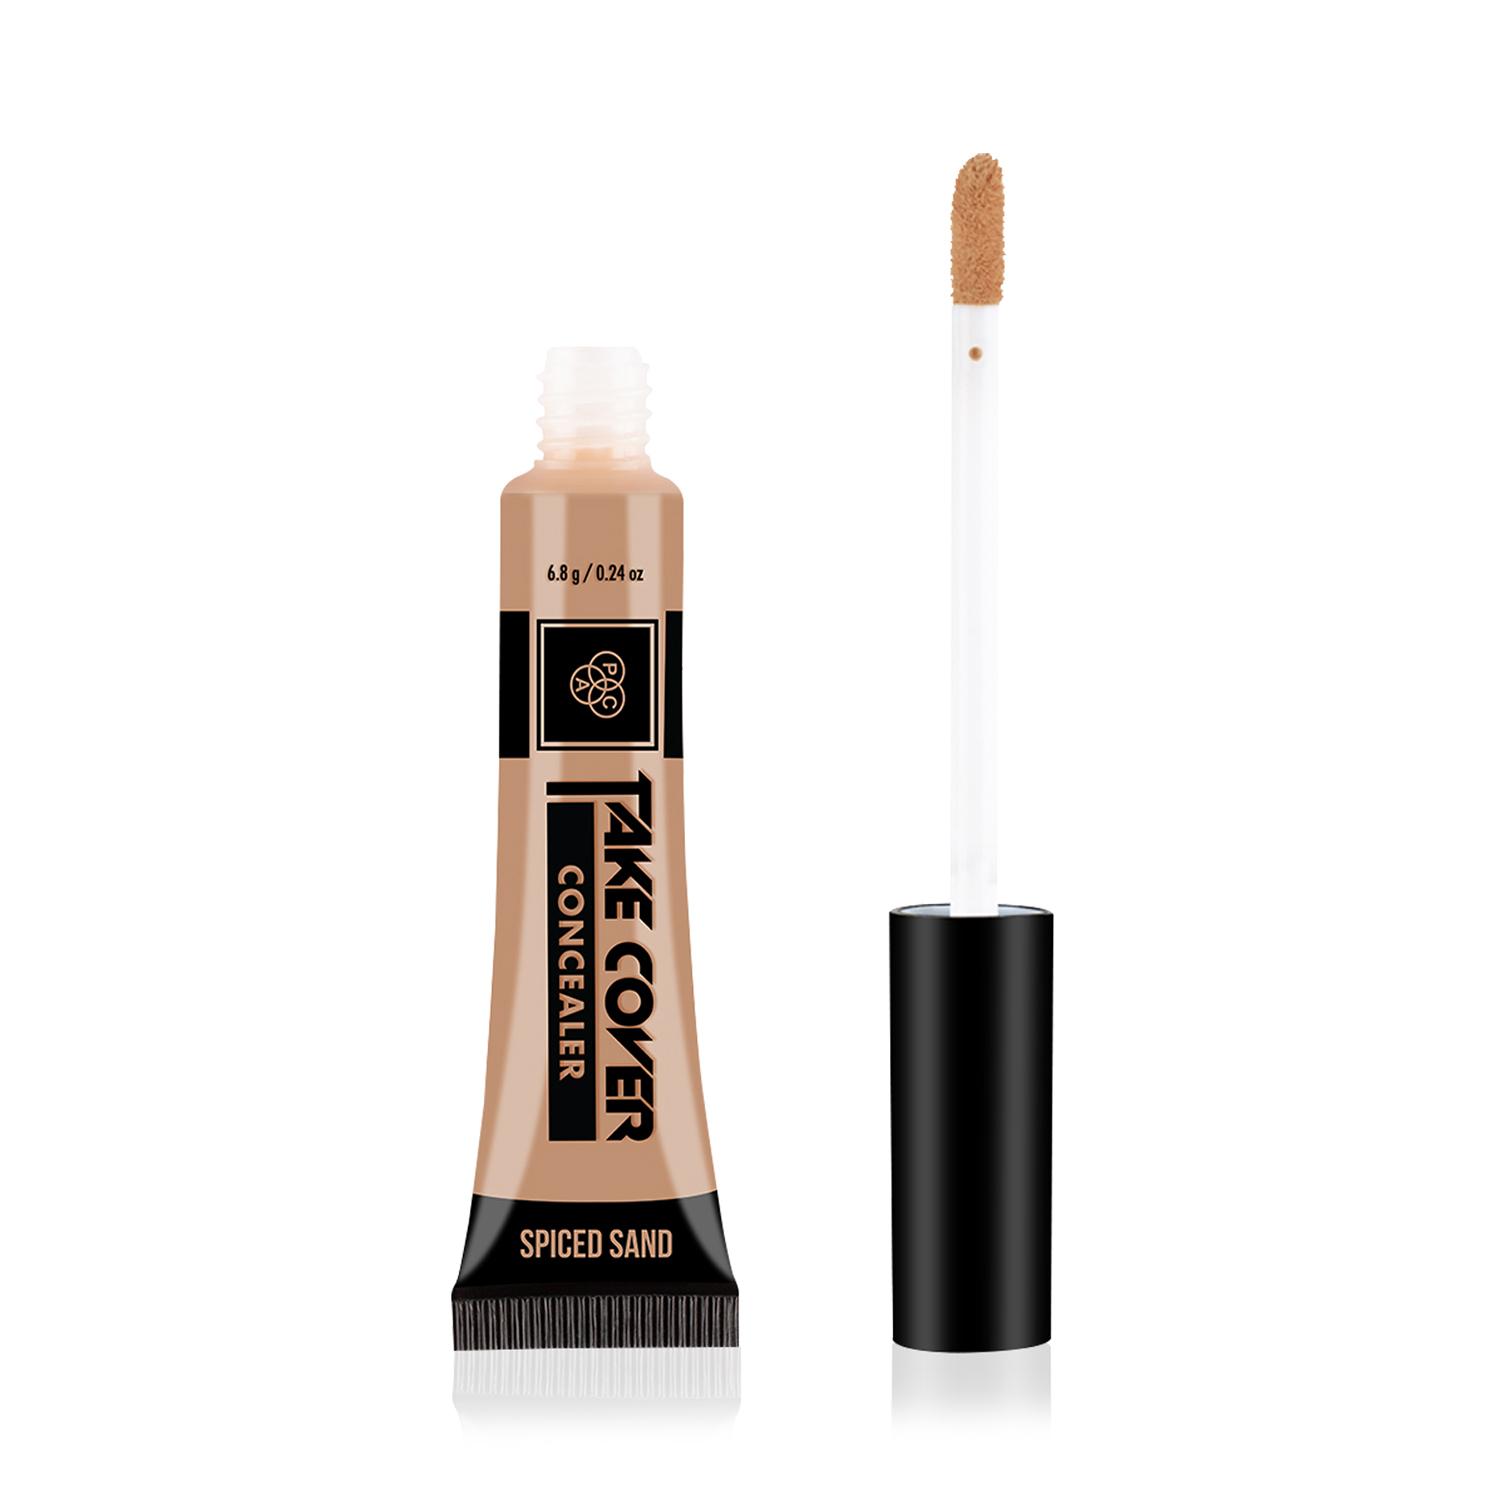 PAC | PAC Take Cover Concealer - 12 Spiced Sand (6.8g)